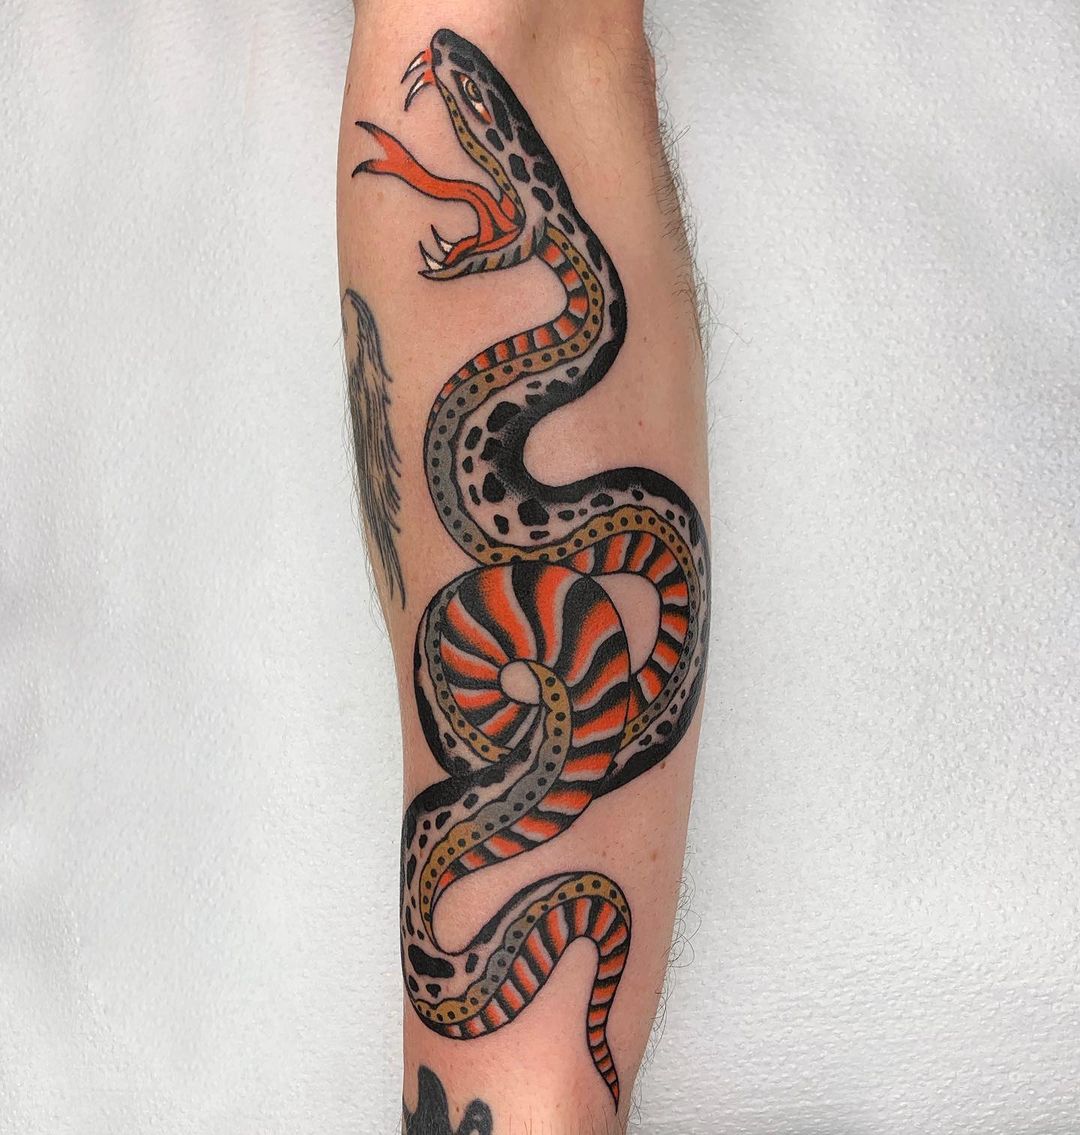 Traditional snake tattoo by summers.tattoos